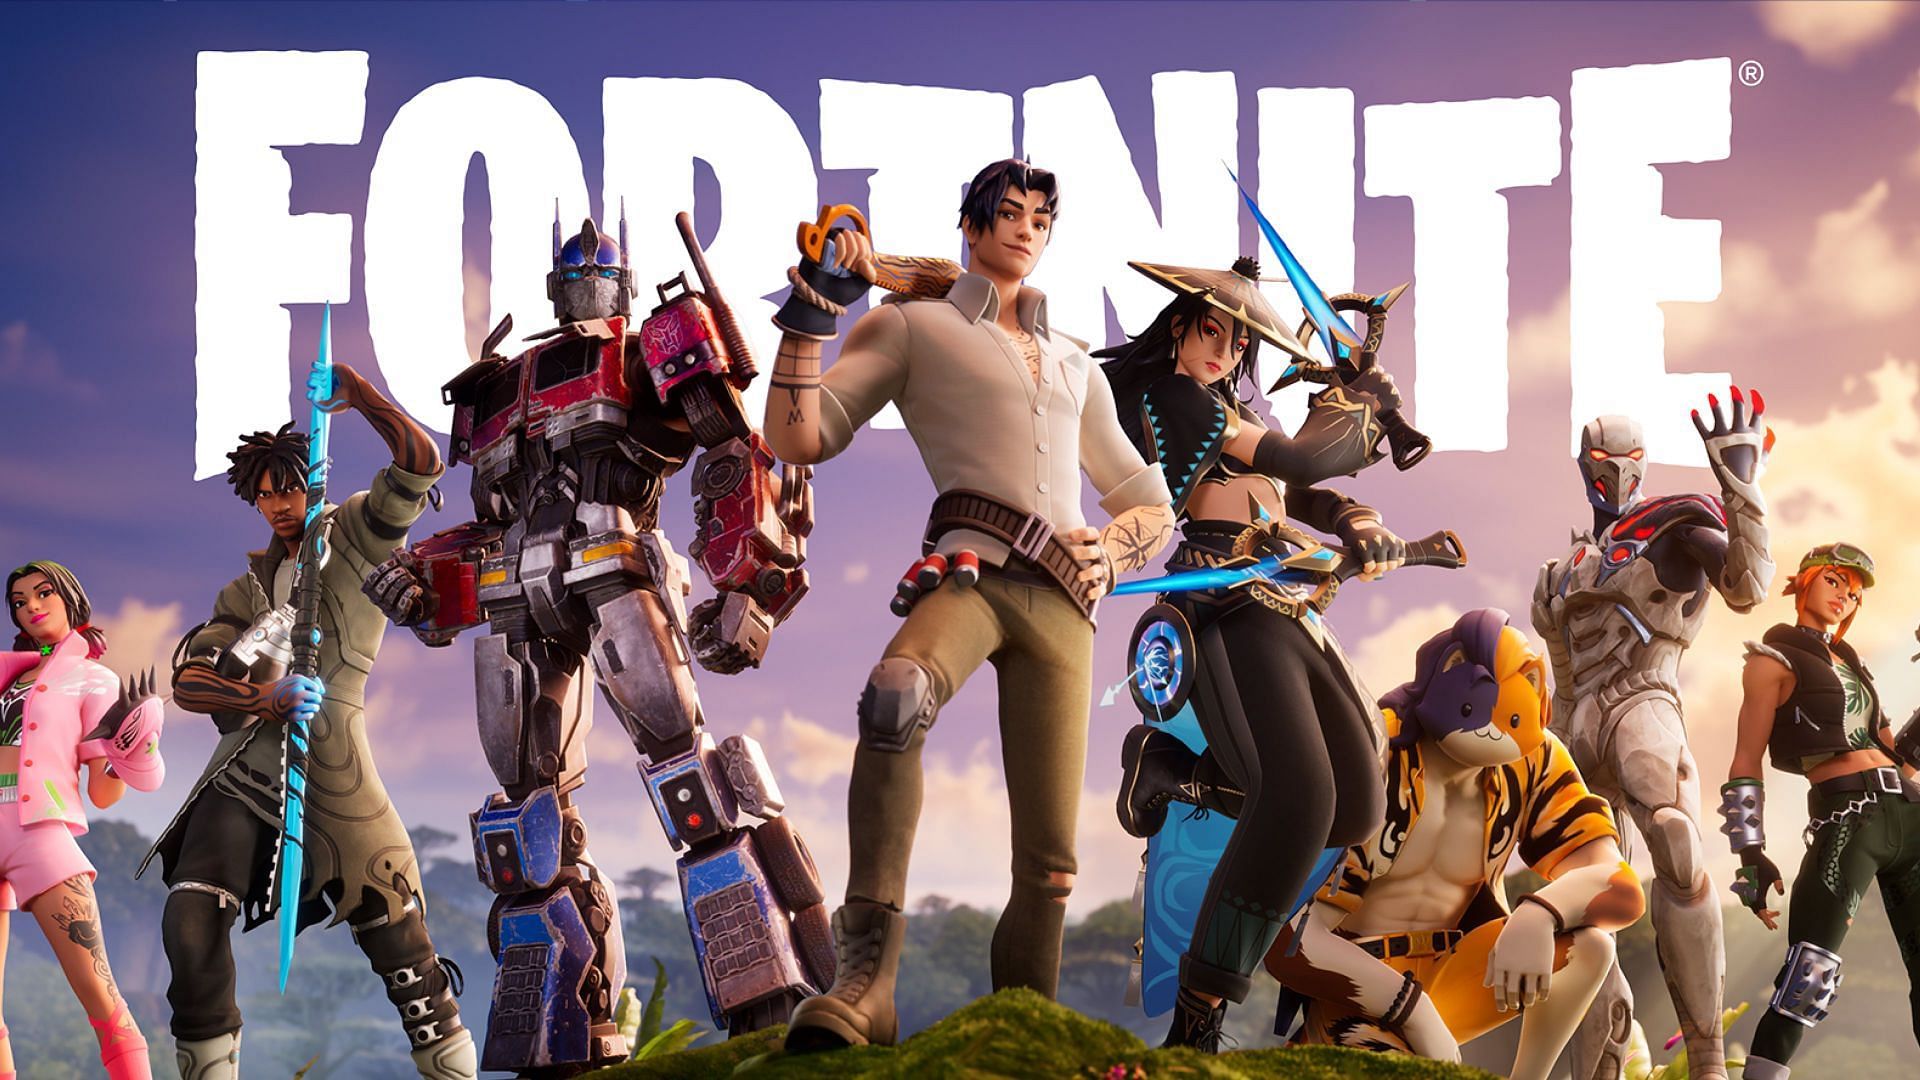 Fortnite is one of the most successful battle royale games of all time (Image via Epic Games)